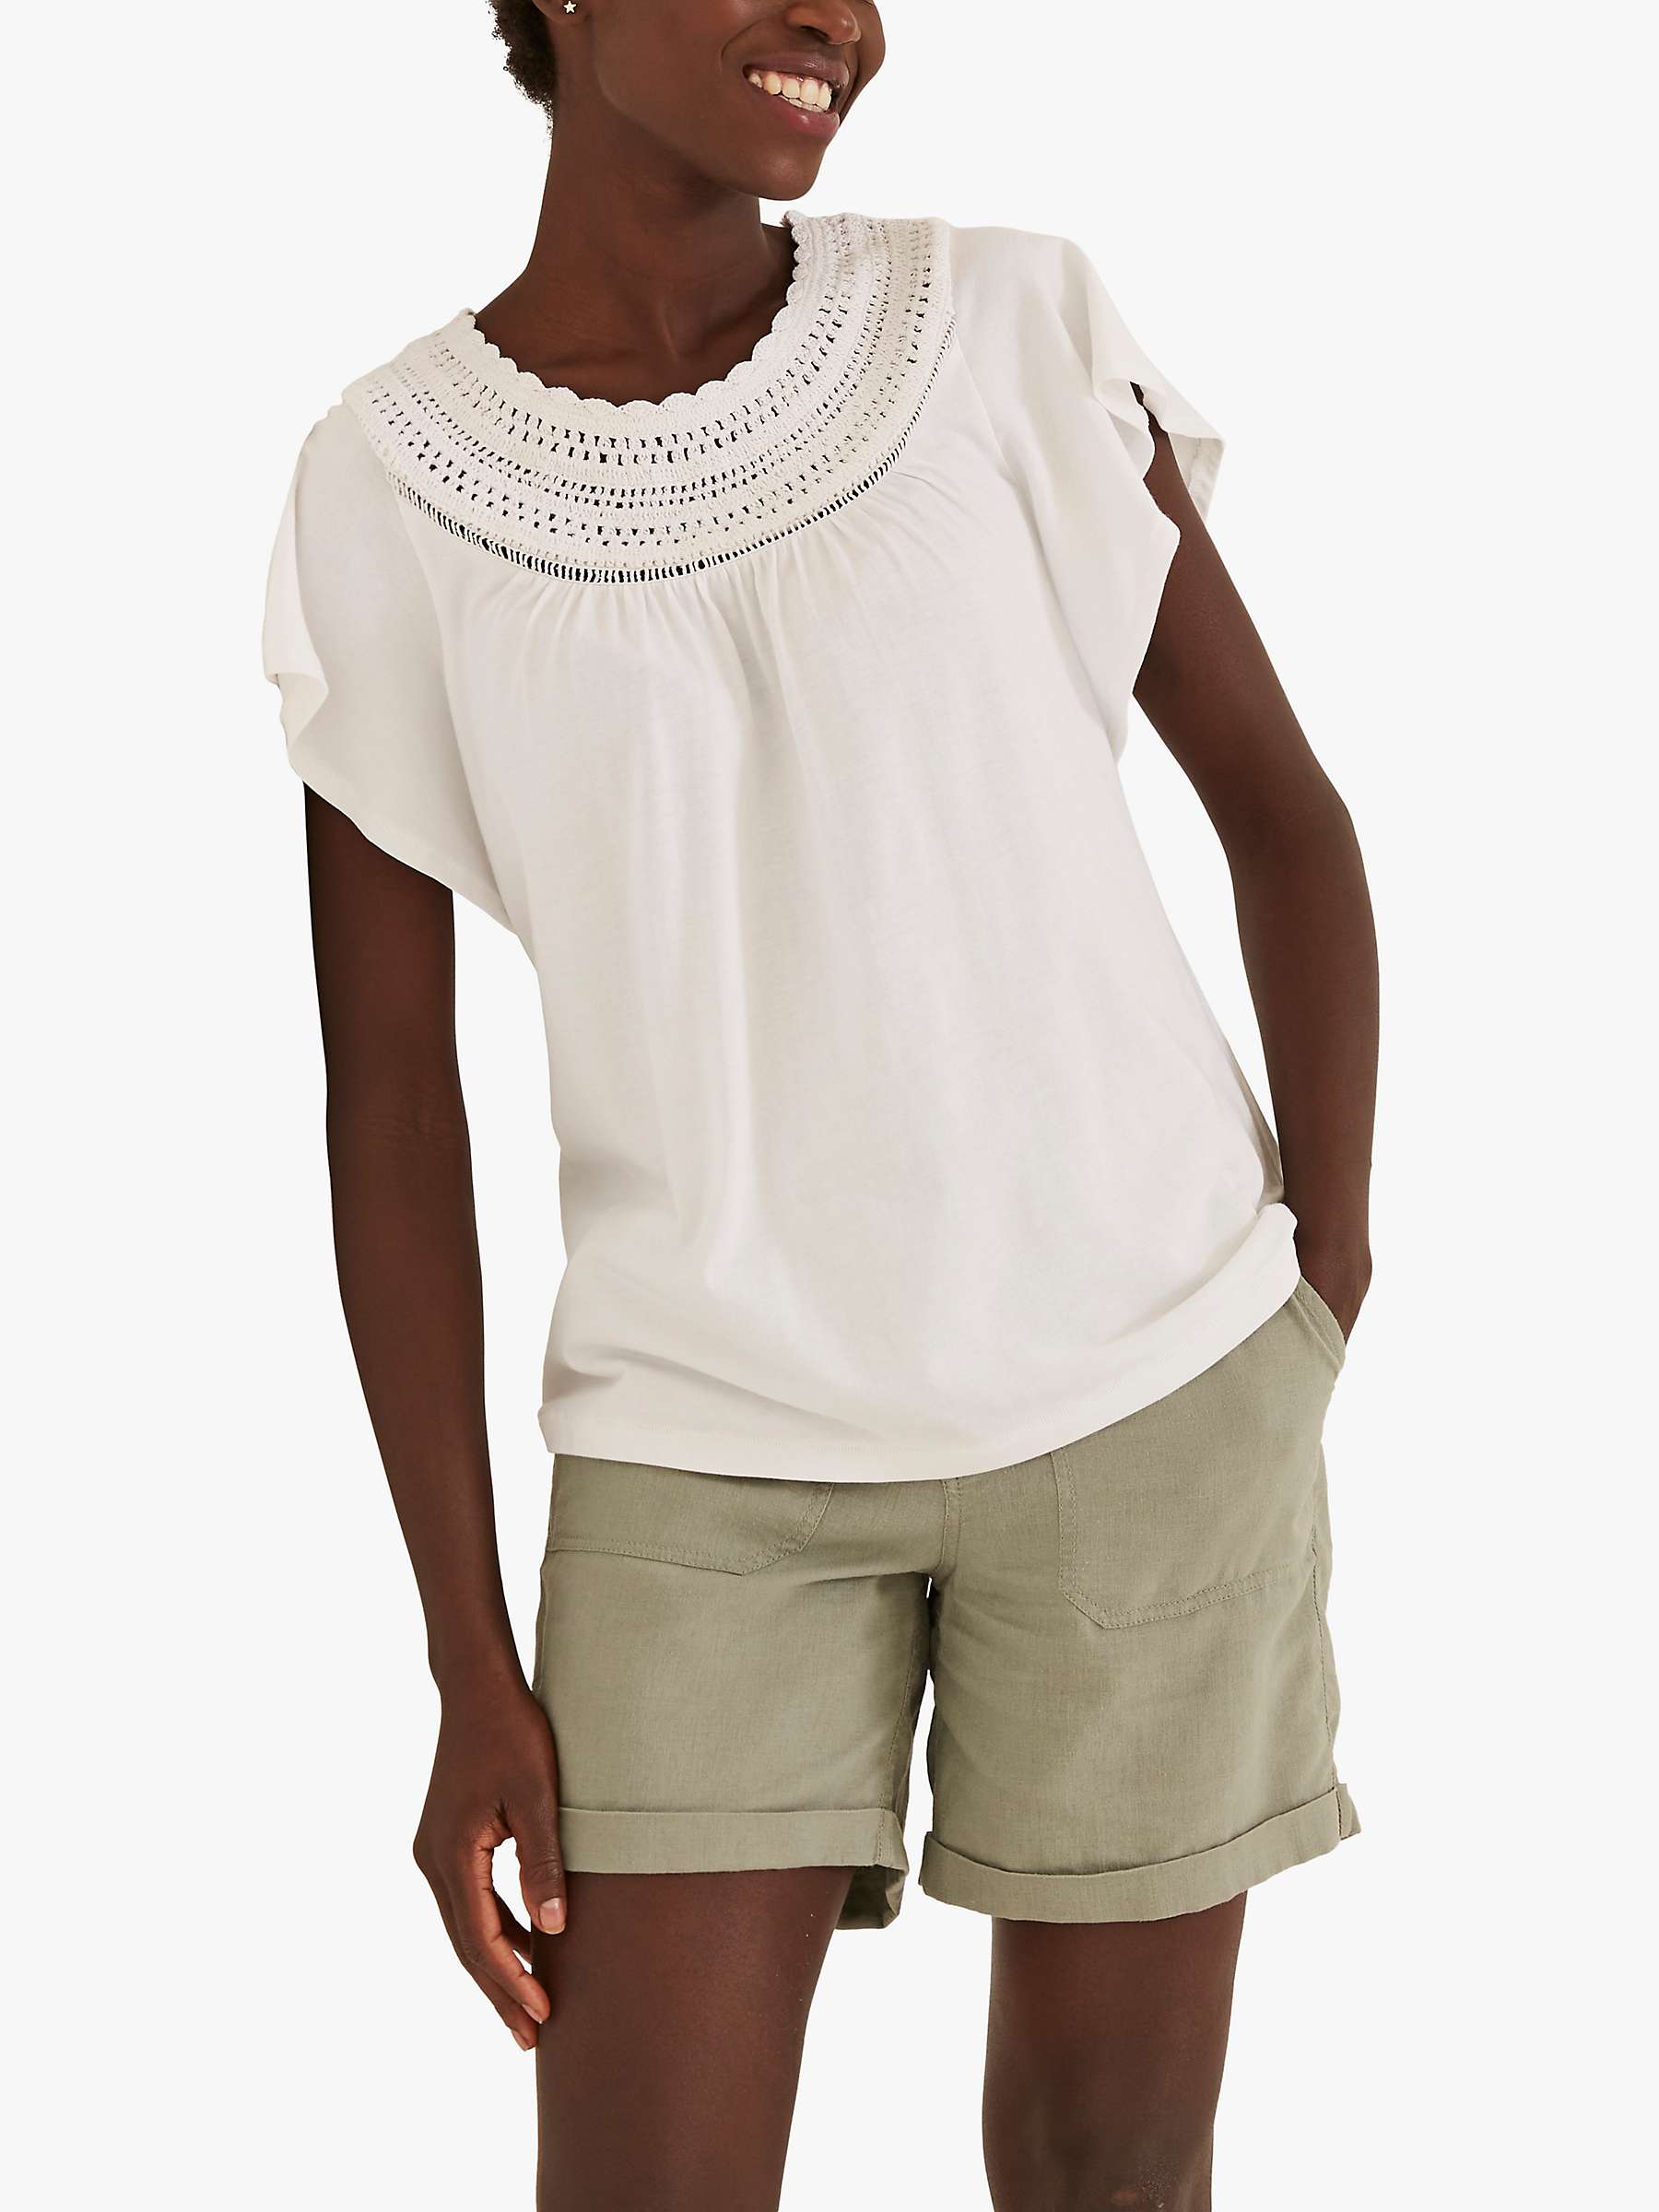 Buy FatFace Daria Embroidered Yolk Top Online at johnlewis.com